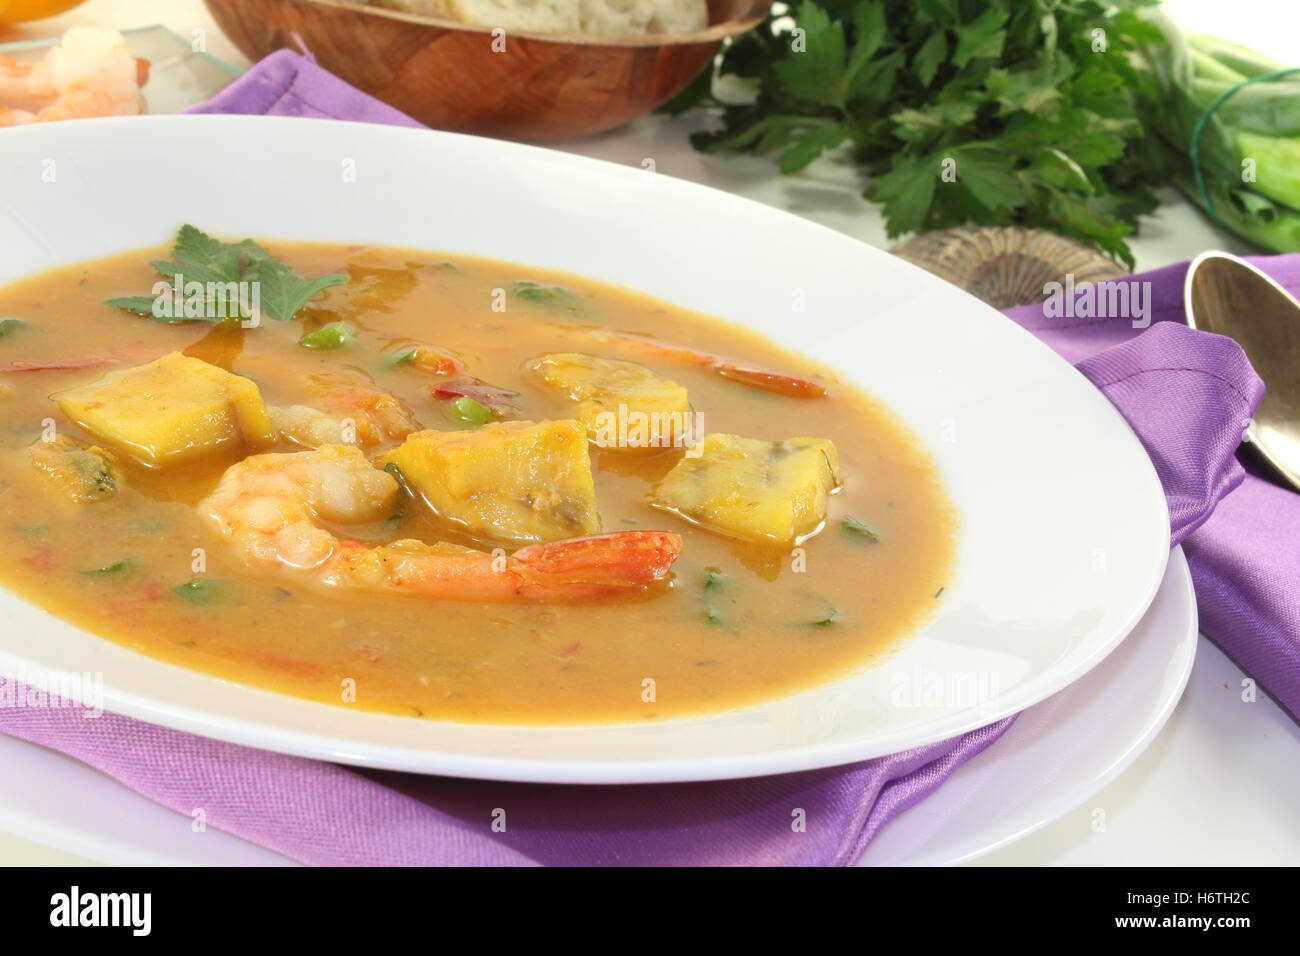 fish dish, soup, fish, france, seafood, shrimps, food, dish, meal, supper, Stock Photo